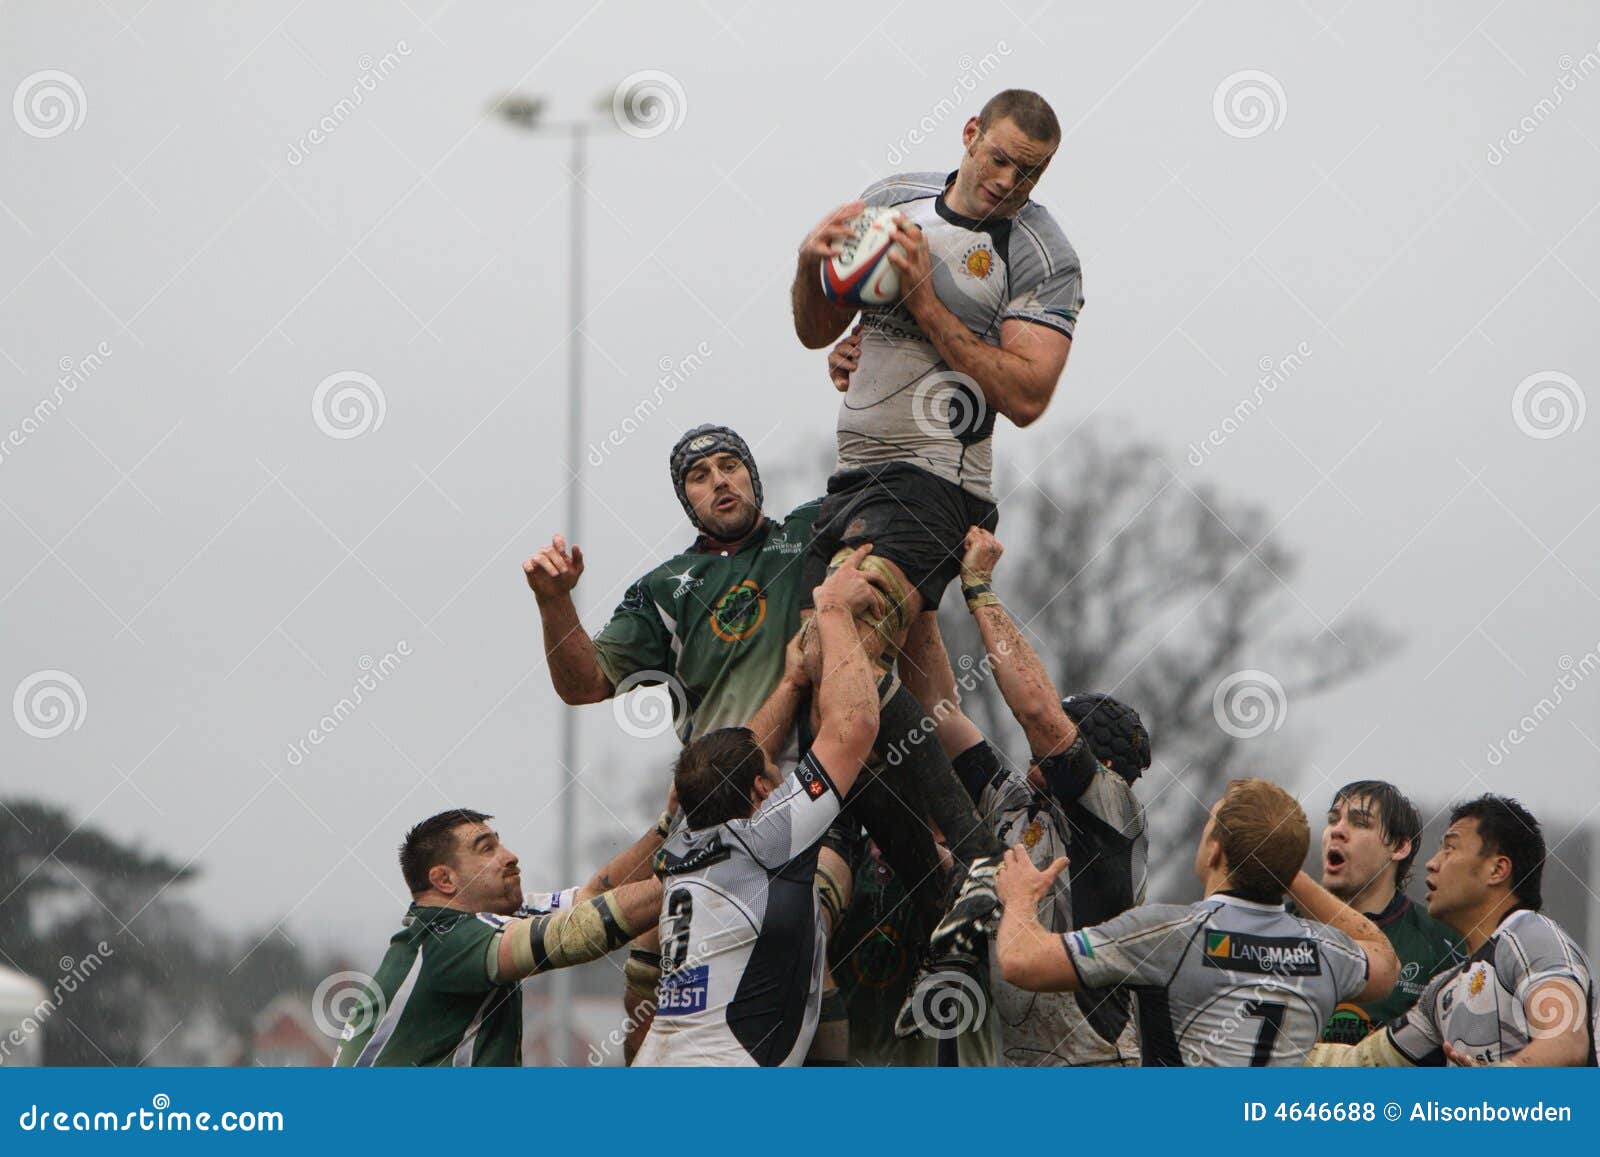 503 Rugby Line Out Stock Photos